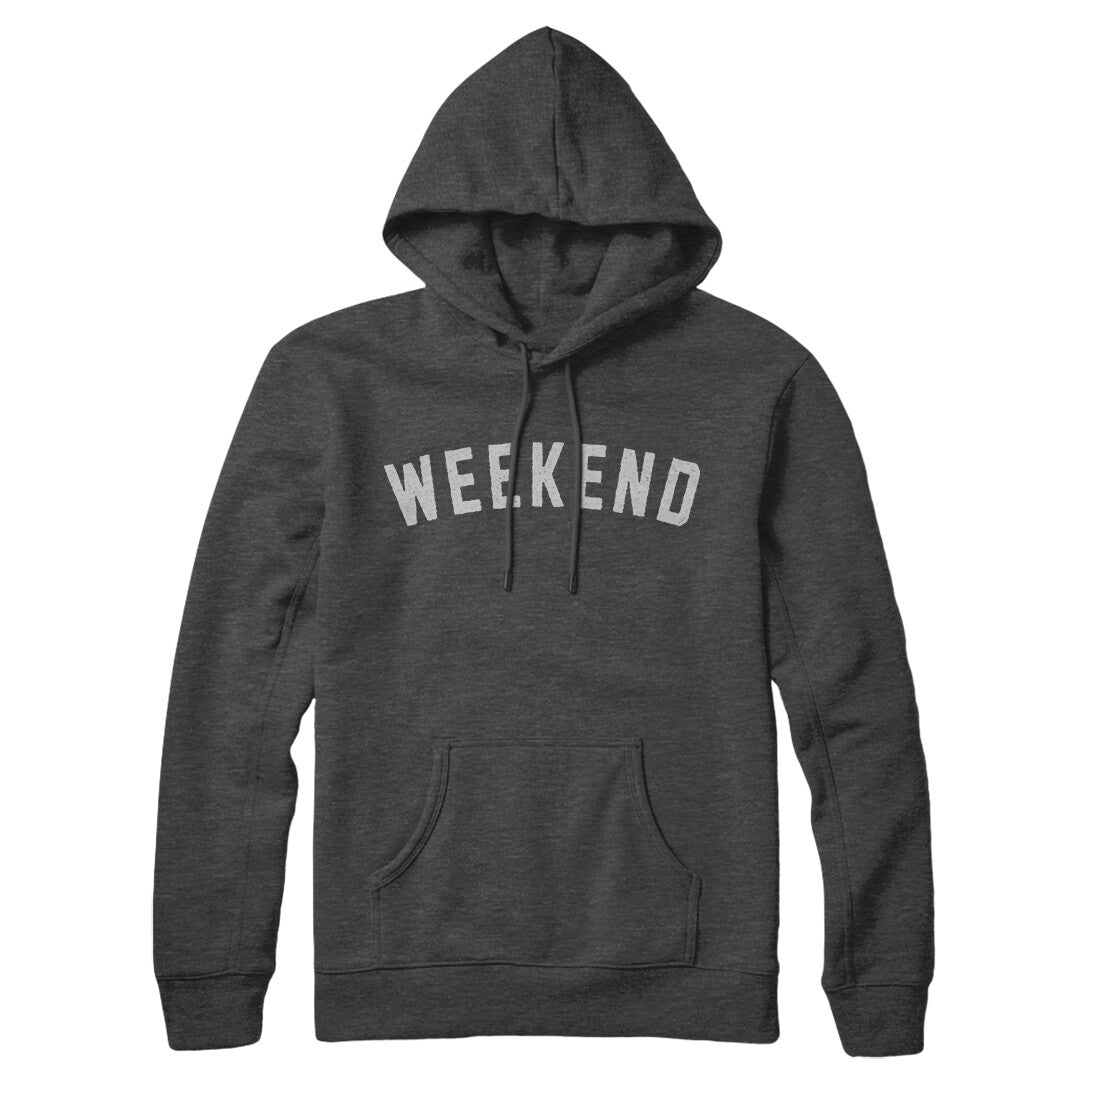 Weekend in Charcoal Heather Color